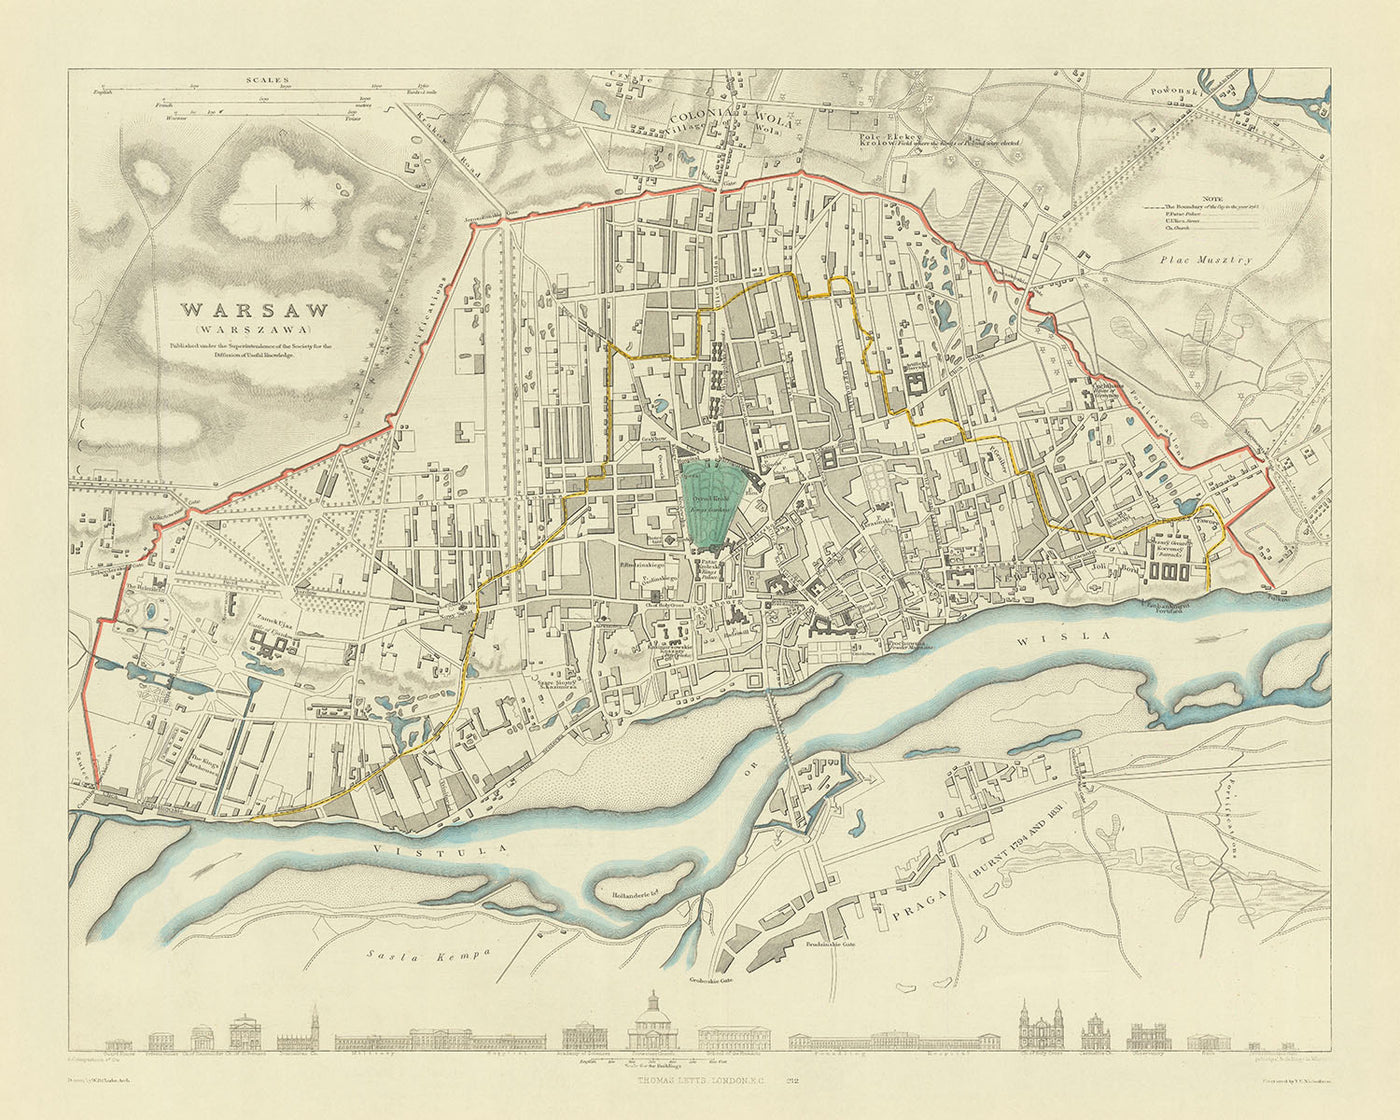 Old Map of Warsaw, 1870: Vistula River, Old Town, Łazienki Park, Royal Castle, Museums